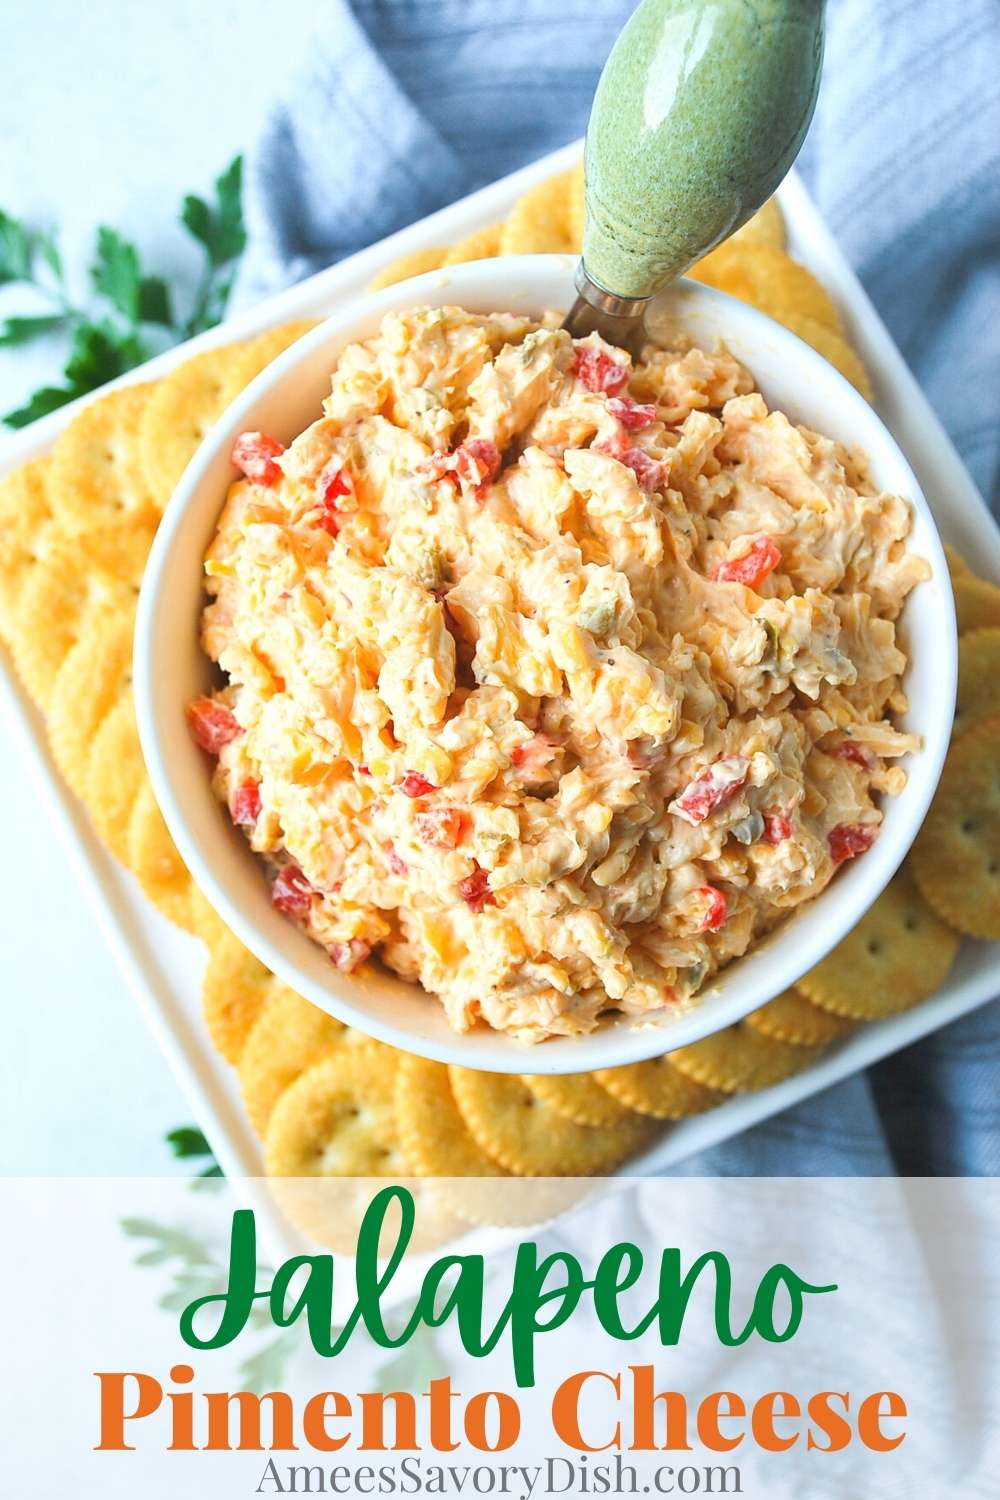 A recipe for jalapeño pimento cheese, a spicy twist on a southern classic. You can leave out the jalapeños for a classic version of this tasty spread. via @Ameessavorydish